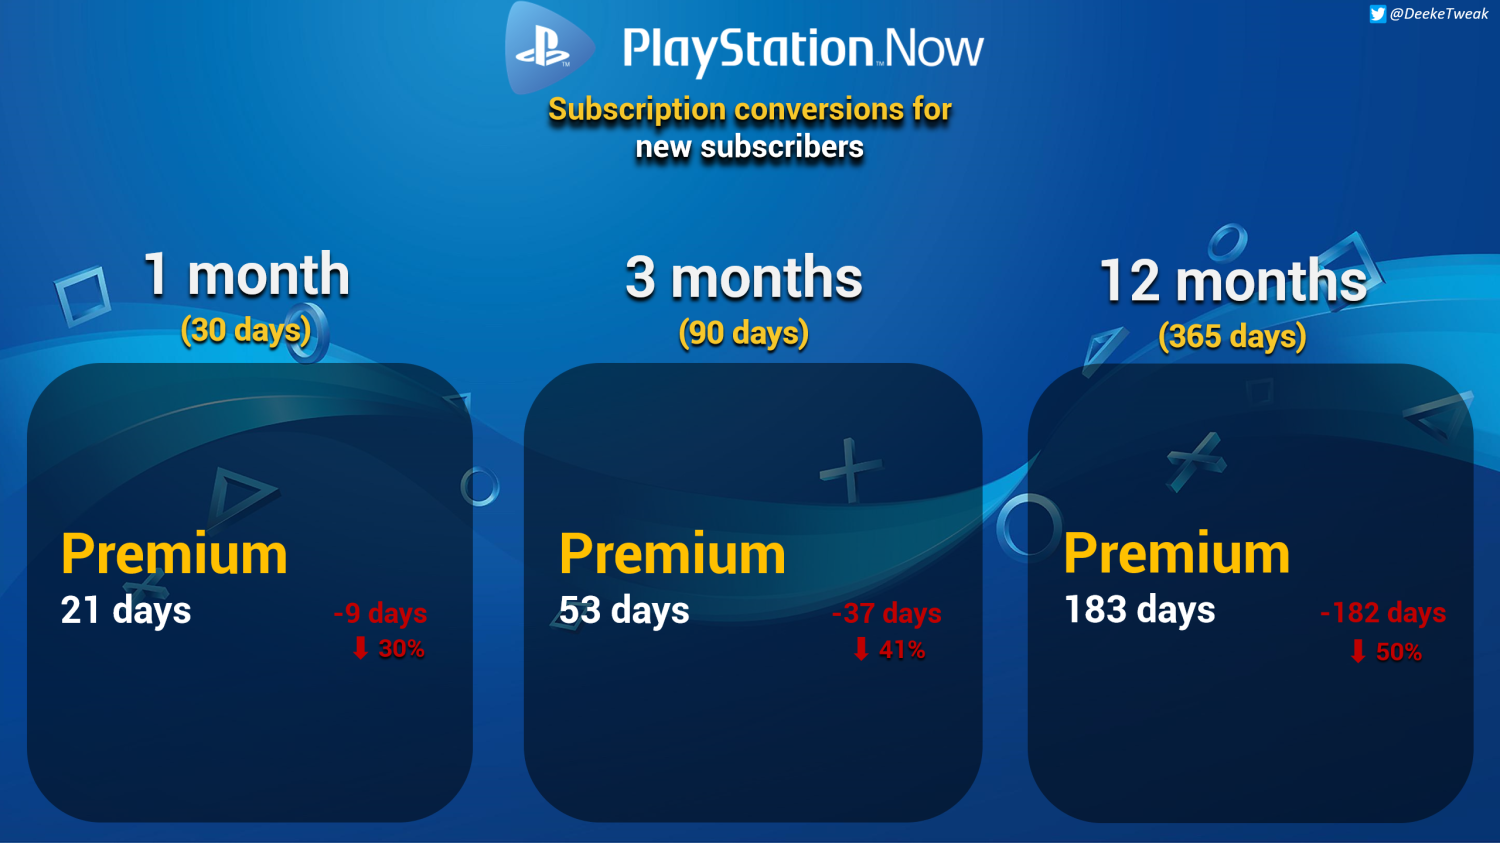 PS Plus Subscribers May Want to Tune In to the PlayStation